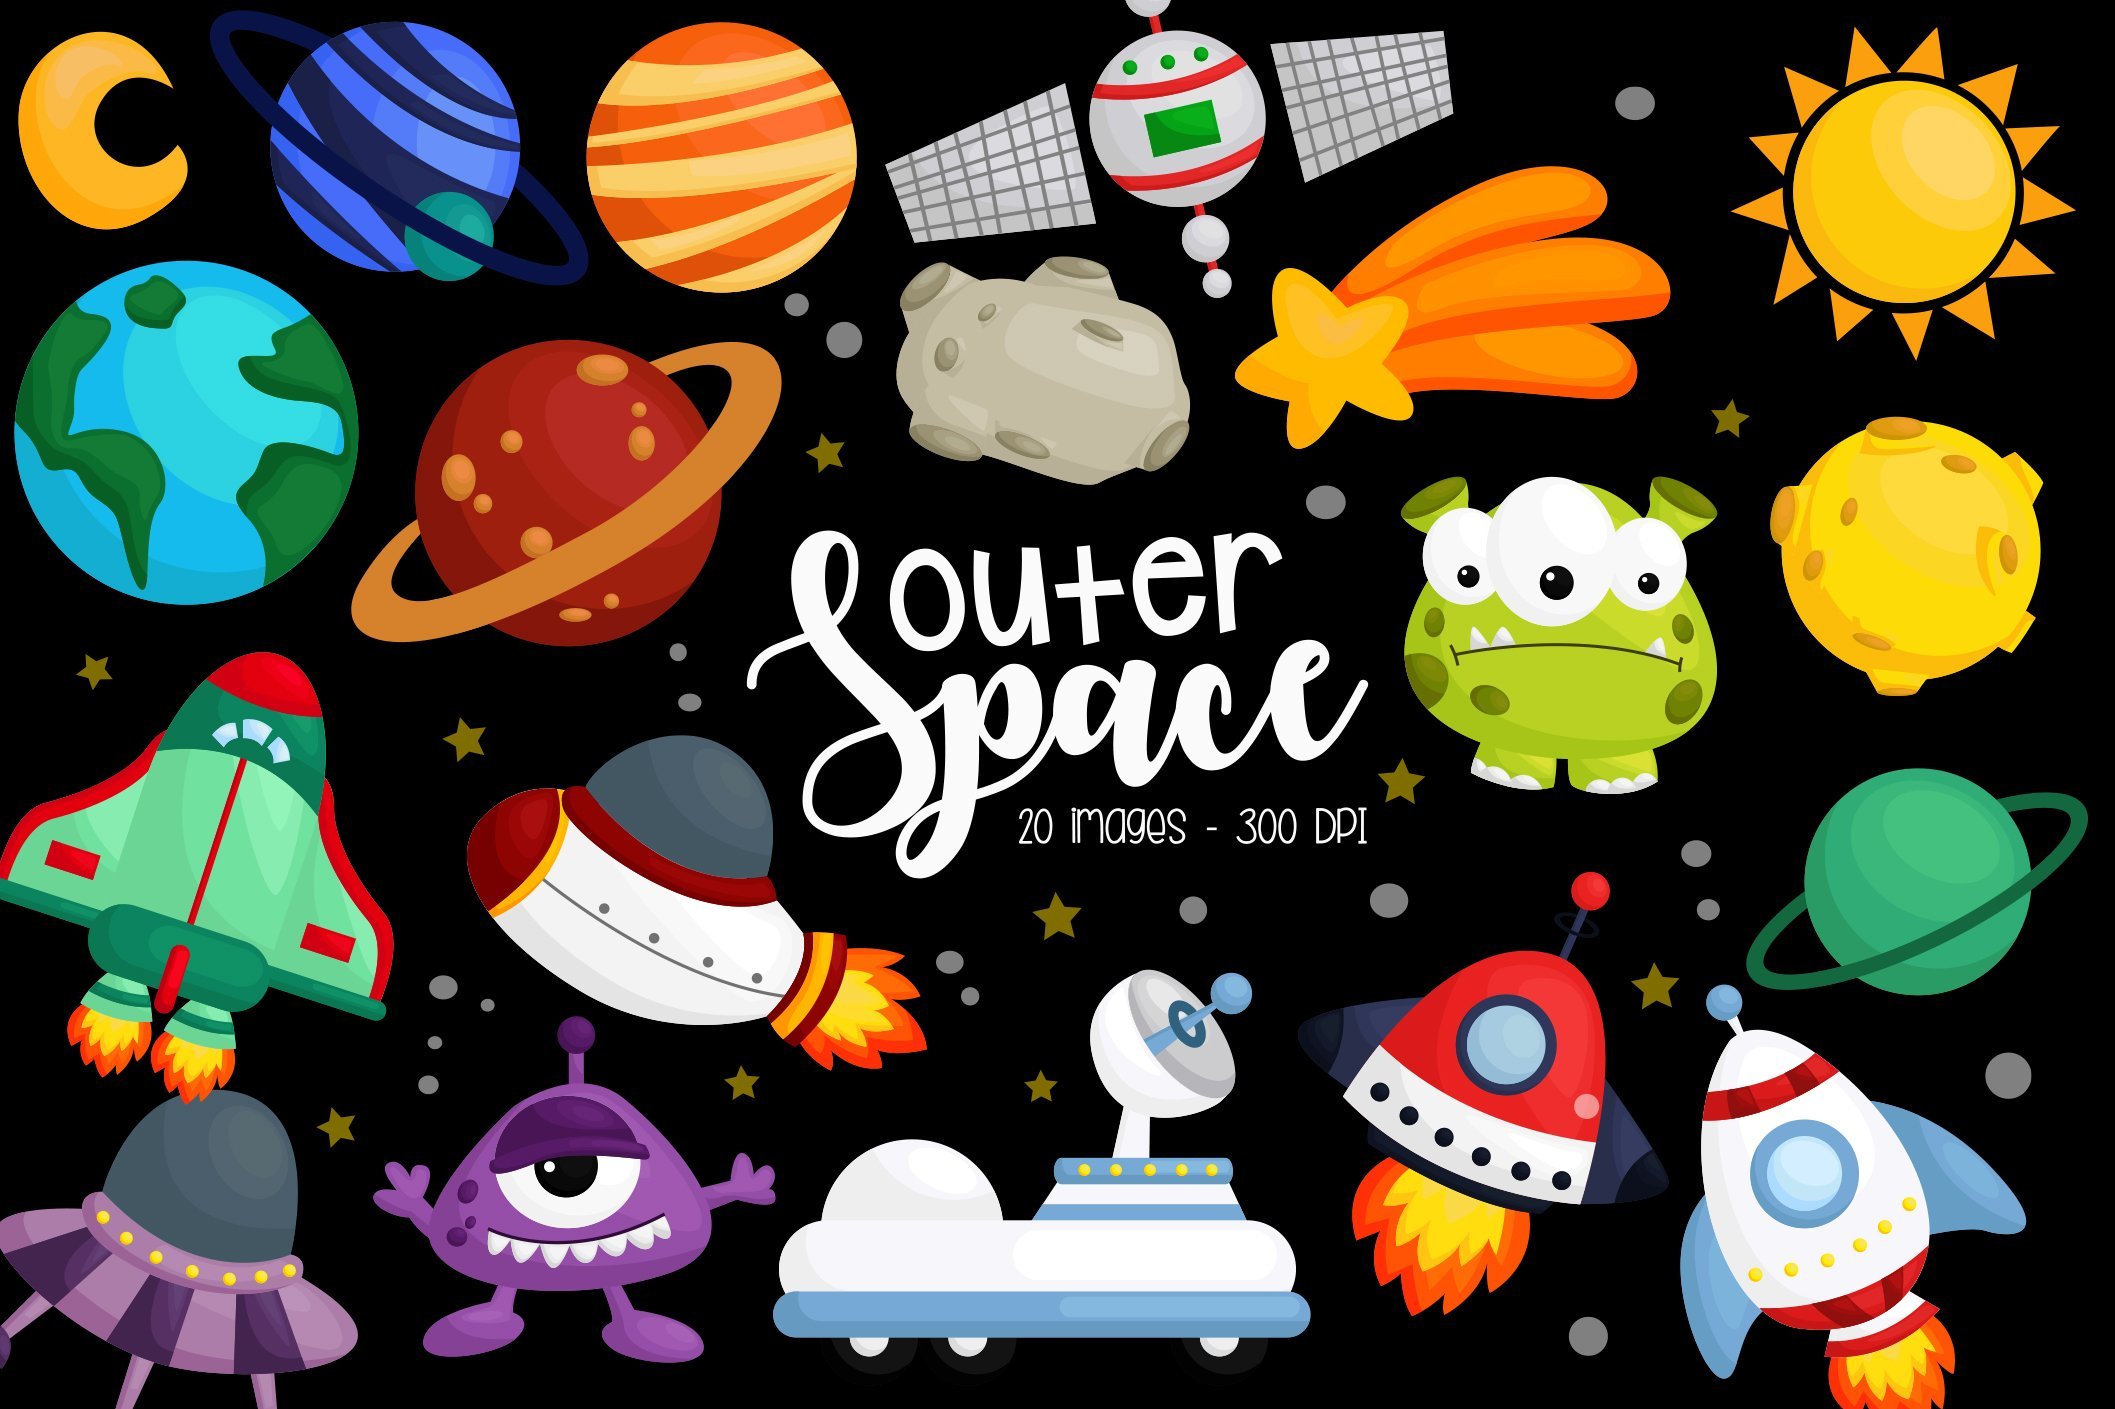 Galaxy and Space Clipart cover image.